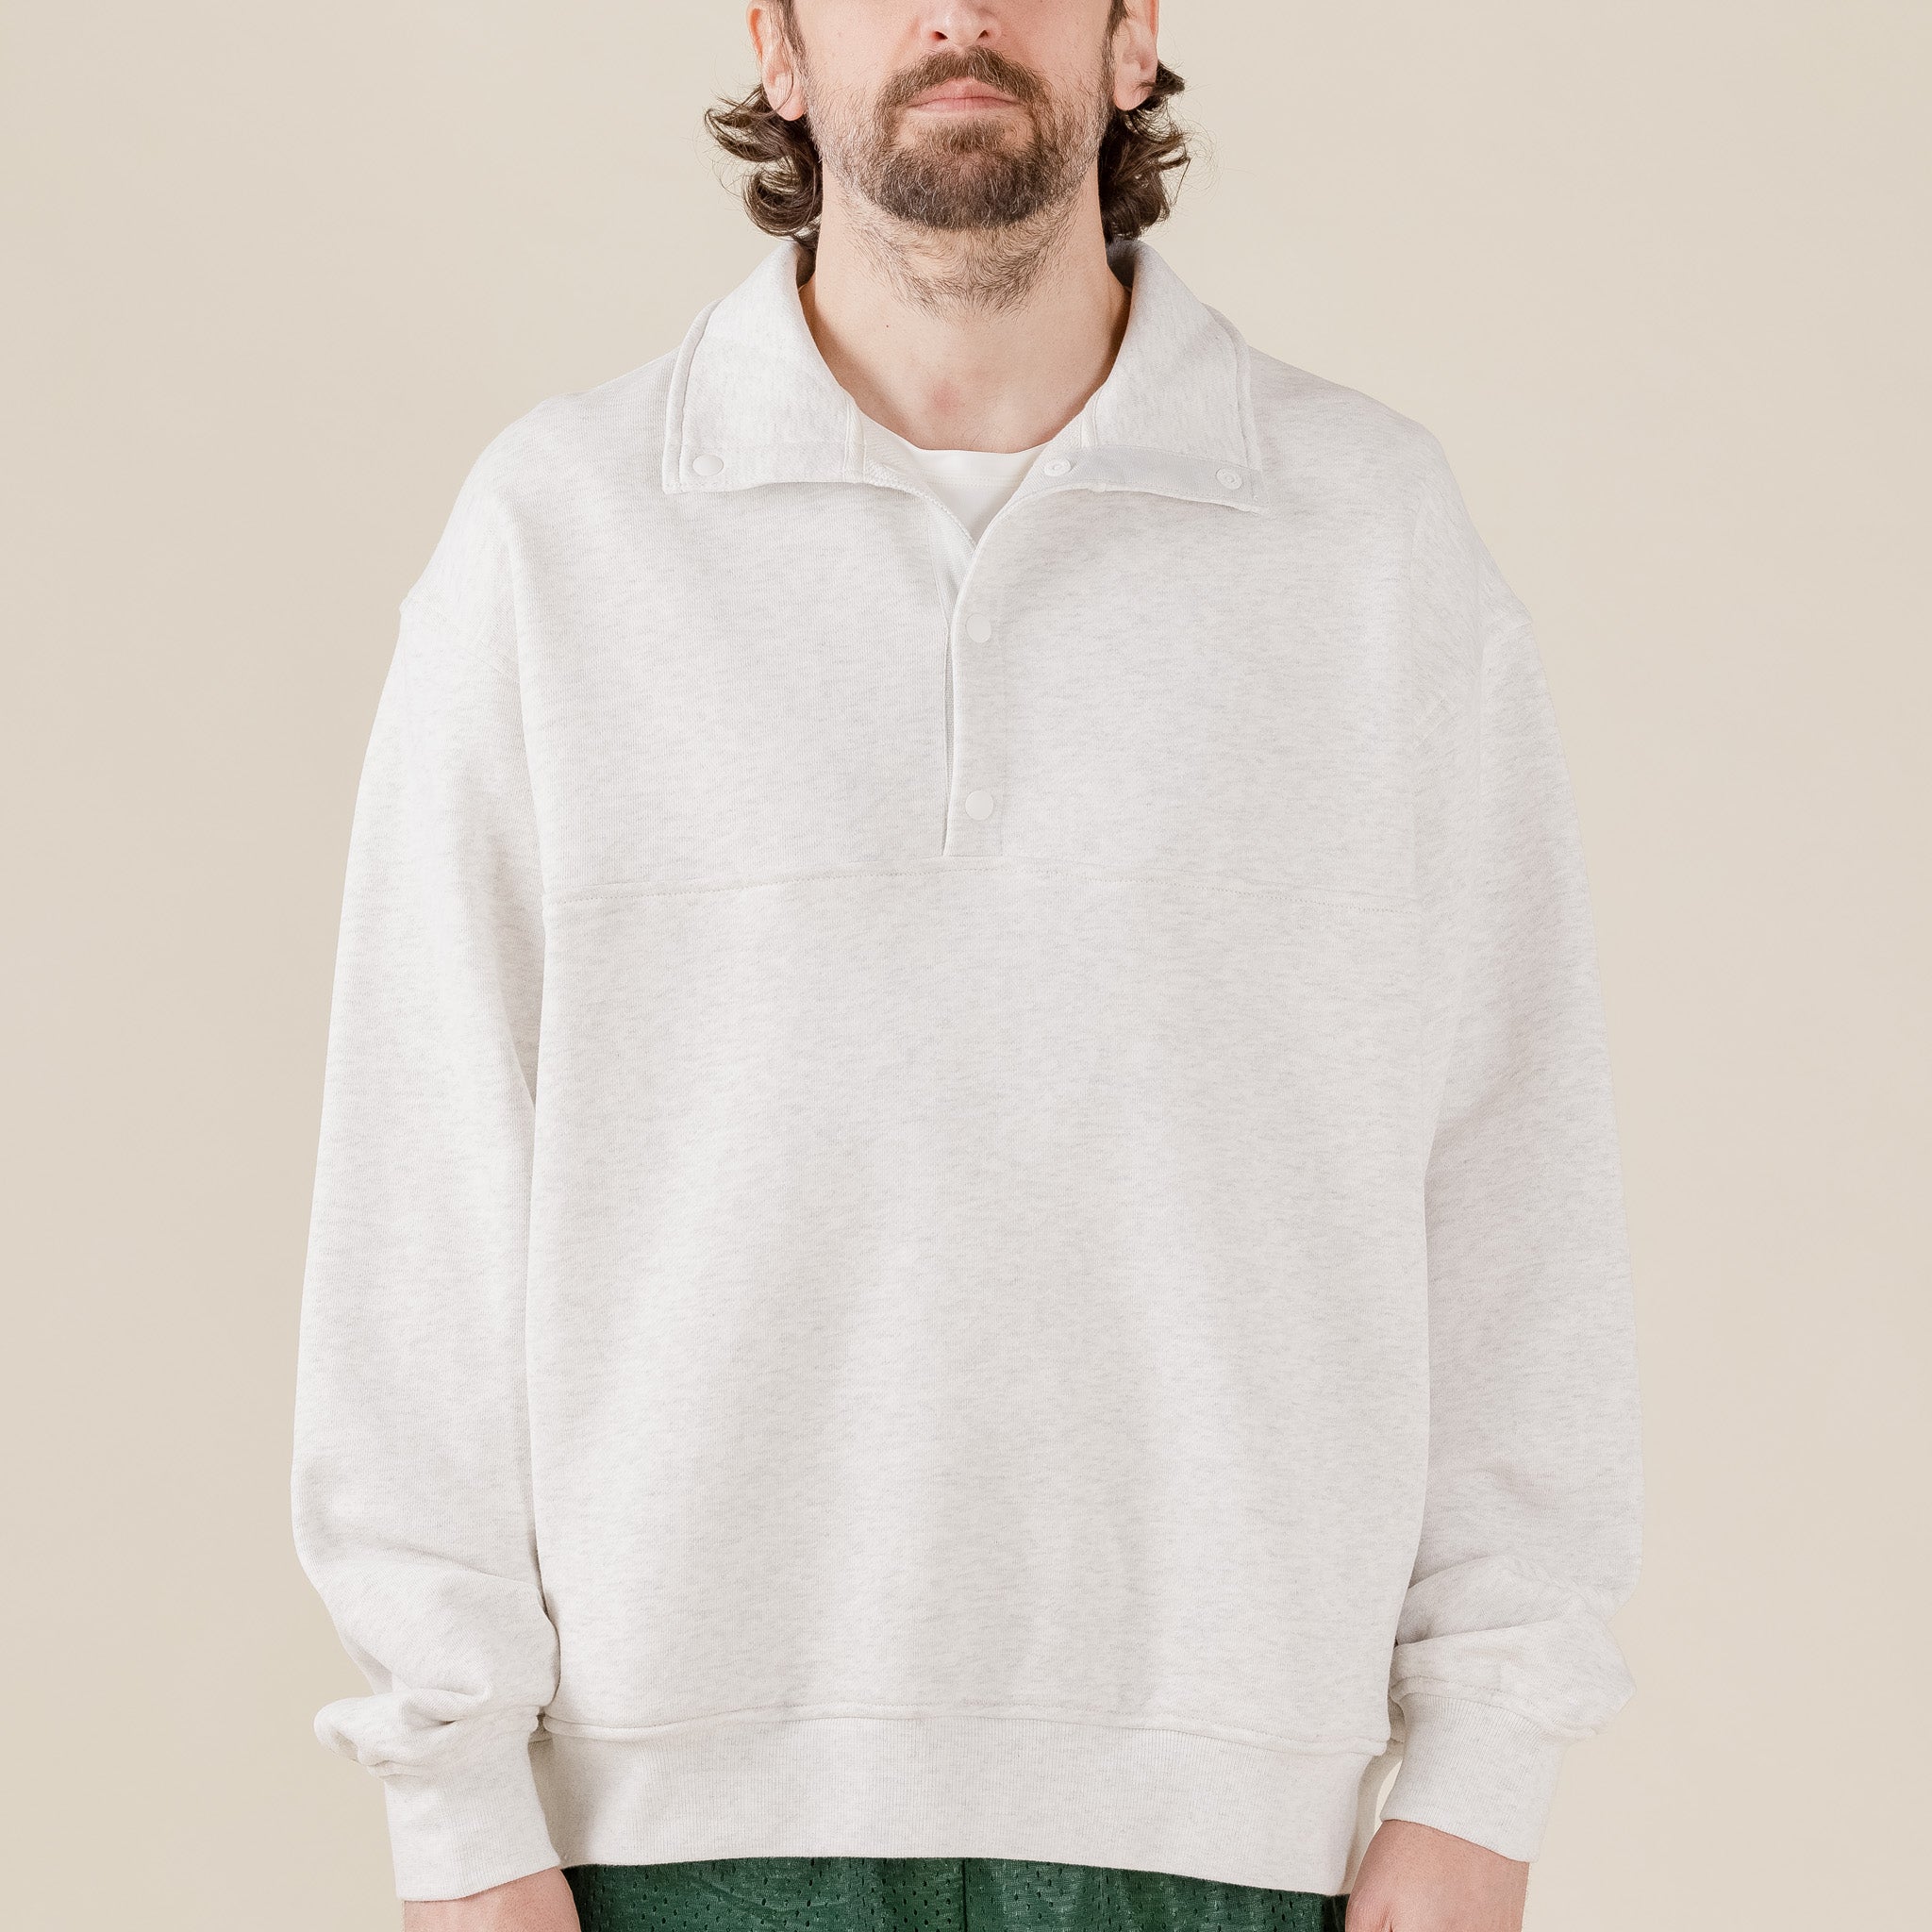 Outstanding & Co - Half Snap Pullover Sweatshirt - 1% Melange Grey "outstanding & co uk stockist" "outstanding & co" "outstanding and co" "better than camber"